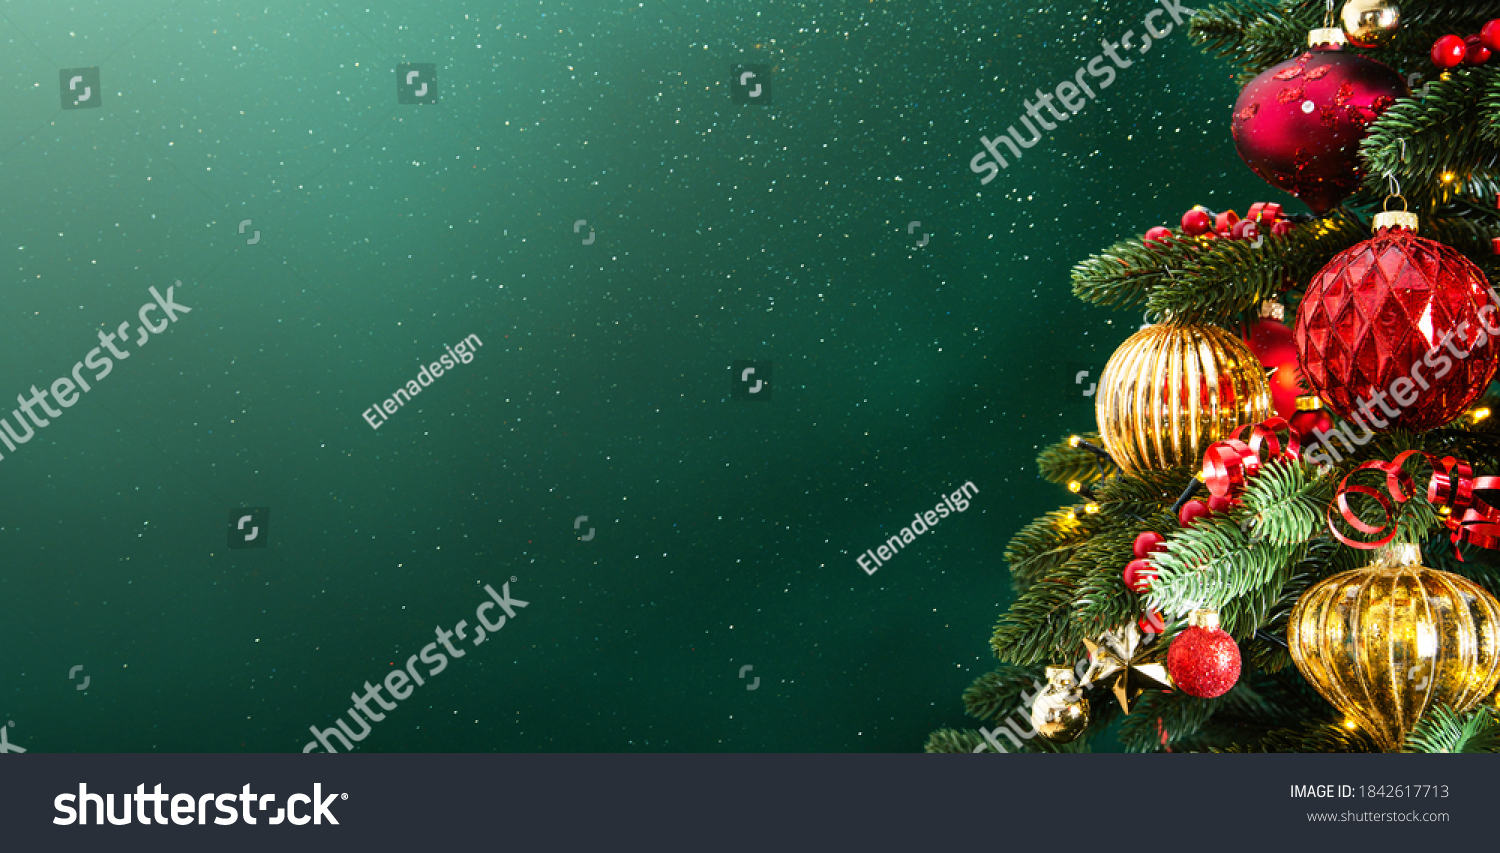 Decorated with ornaments and lights Christmas tree on dark green background. Merry Christmas and Happy Holidays greeting card, frame, banner. New Year. Noel. Winter holiday theme.  #1842617713